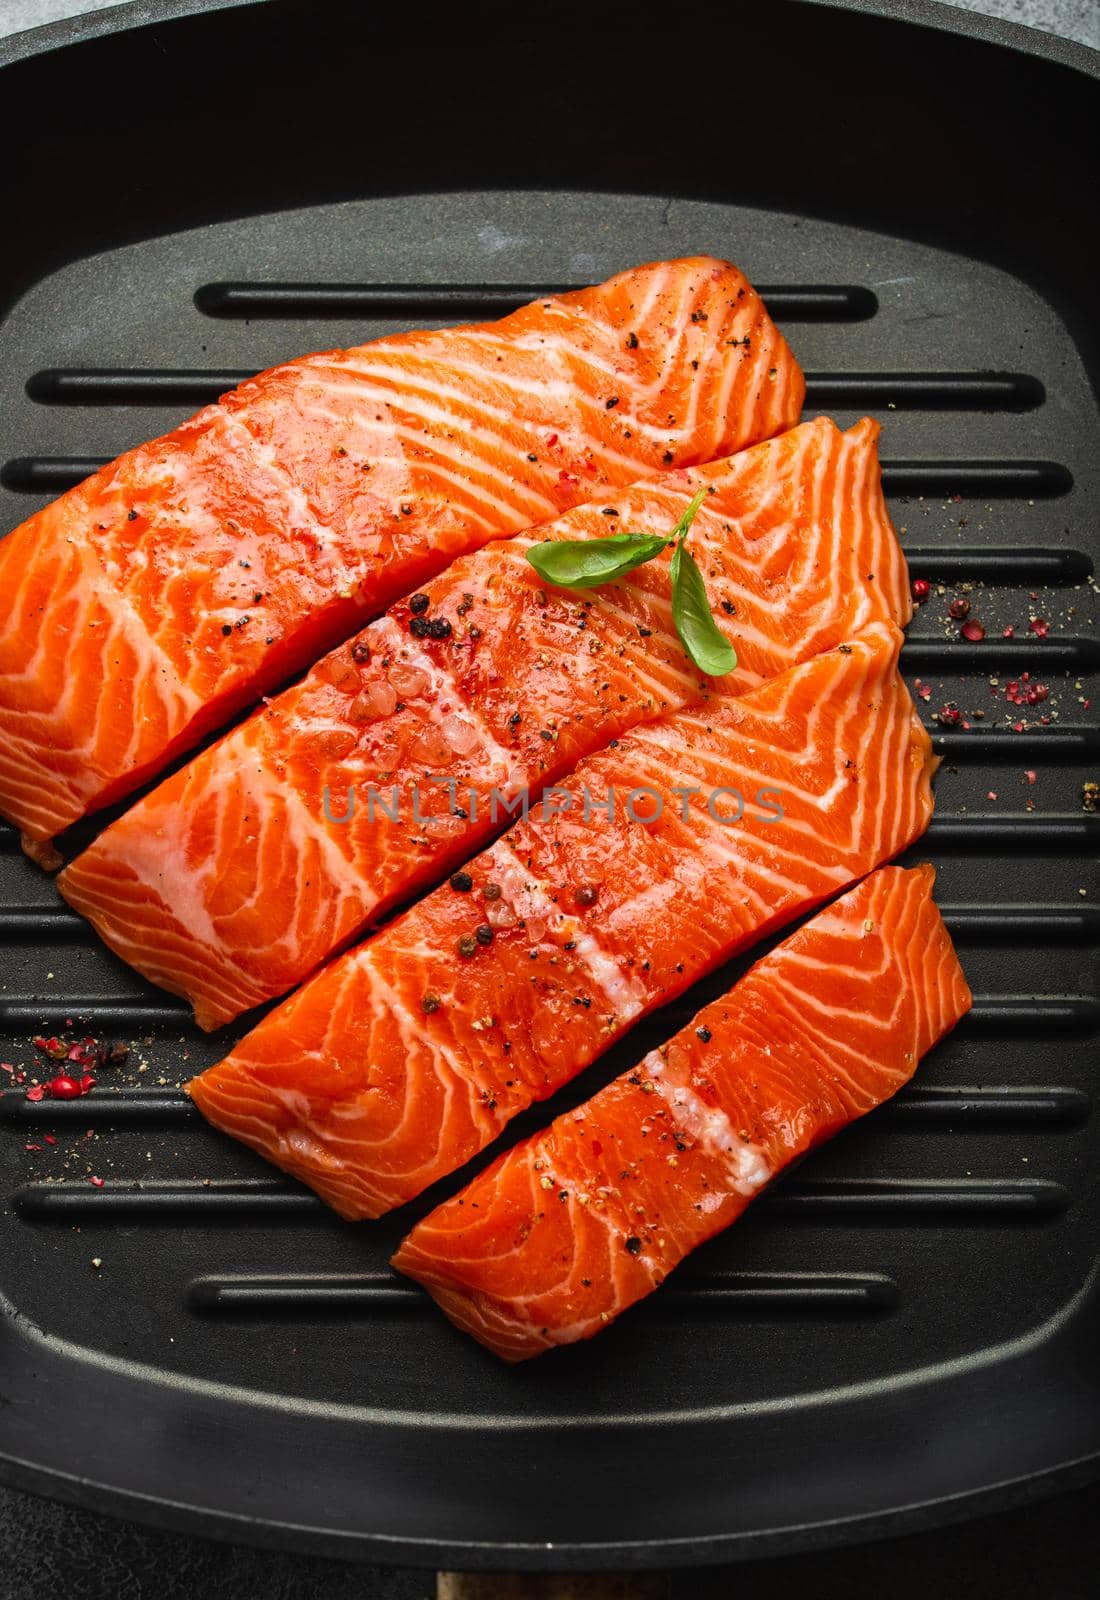 Top view, close-up of cut in slices fresh raw salmon fillet garnished with green basil leaves on grill skillet, gray stone background. Preparing salmon fillet for cooking, healthy eating concept